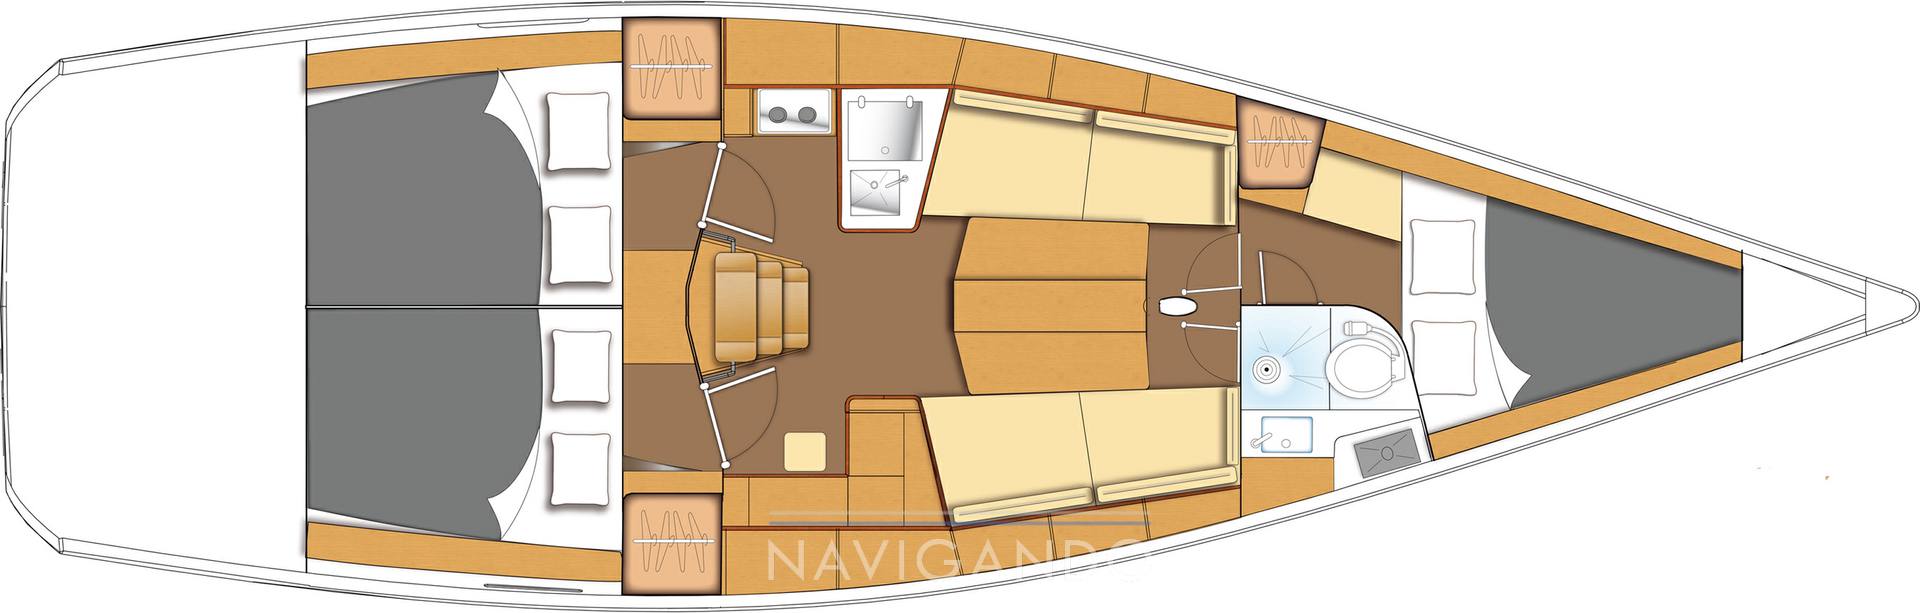 Beneteau First 40 Drawing